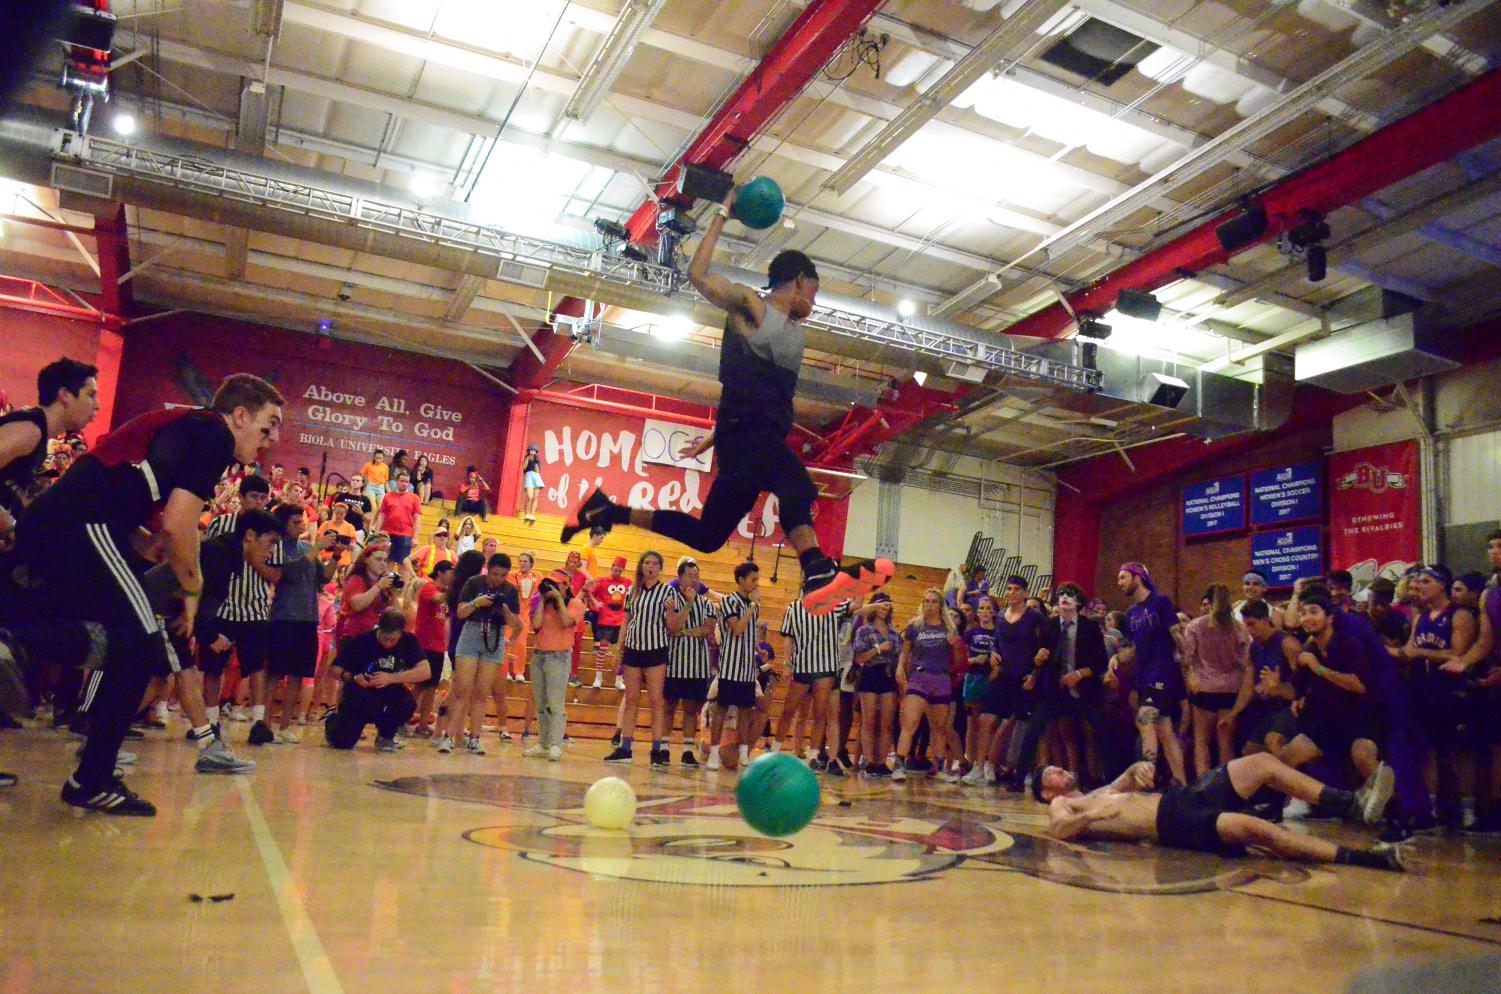 A horton resident leaps into the air with a dodgeball toward the off-campus community students